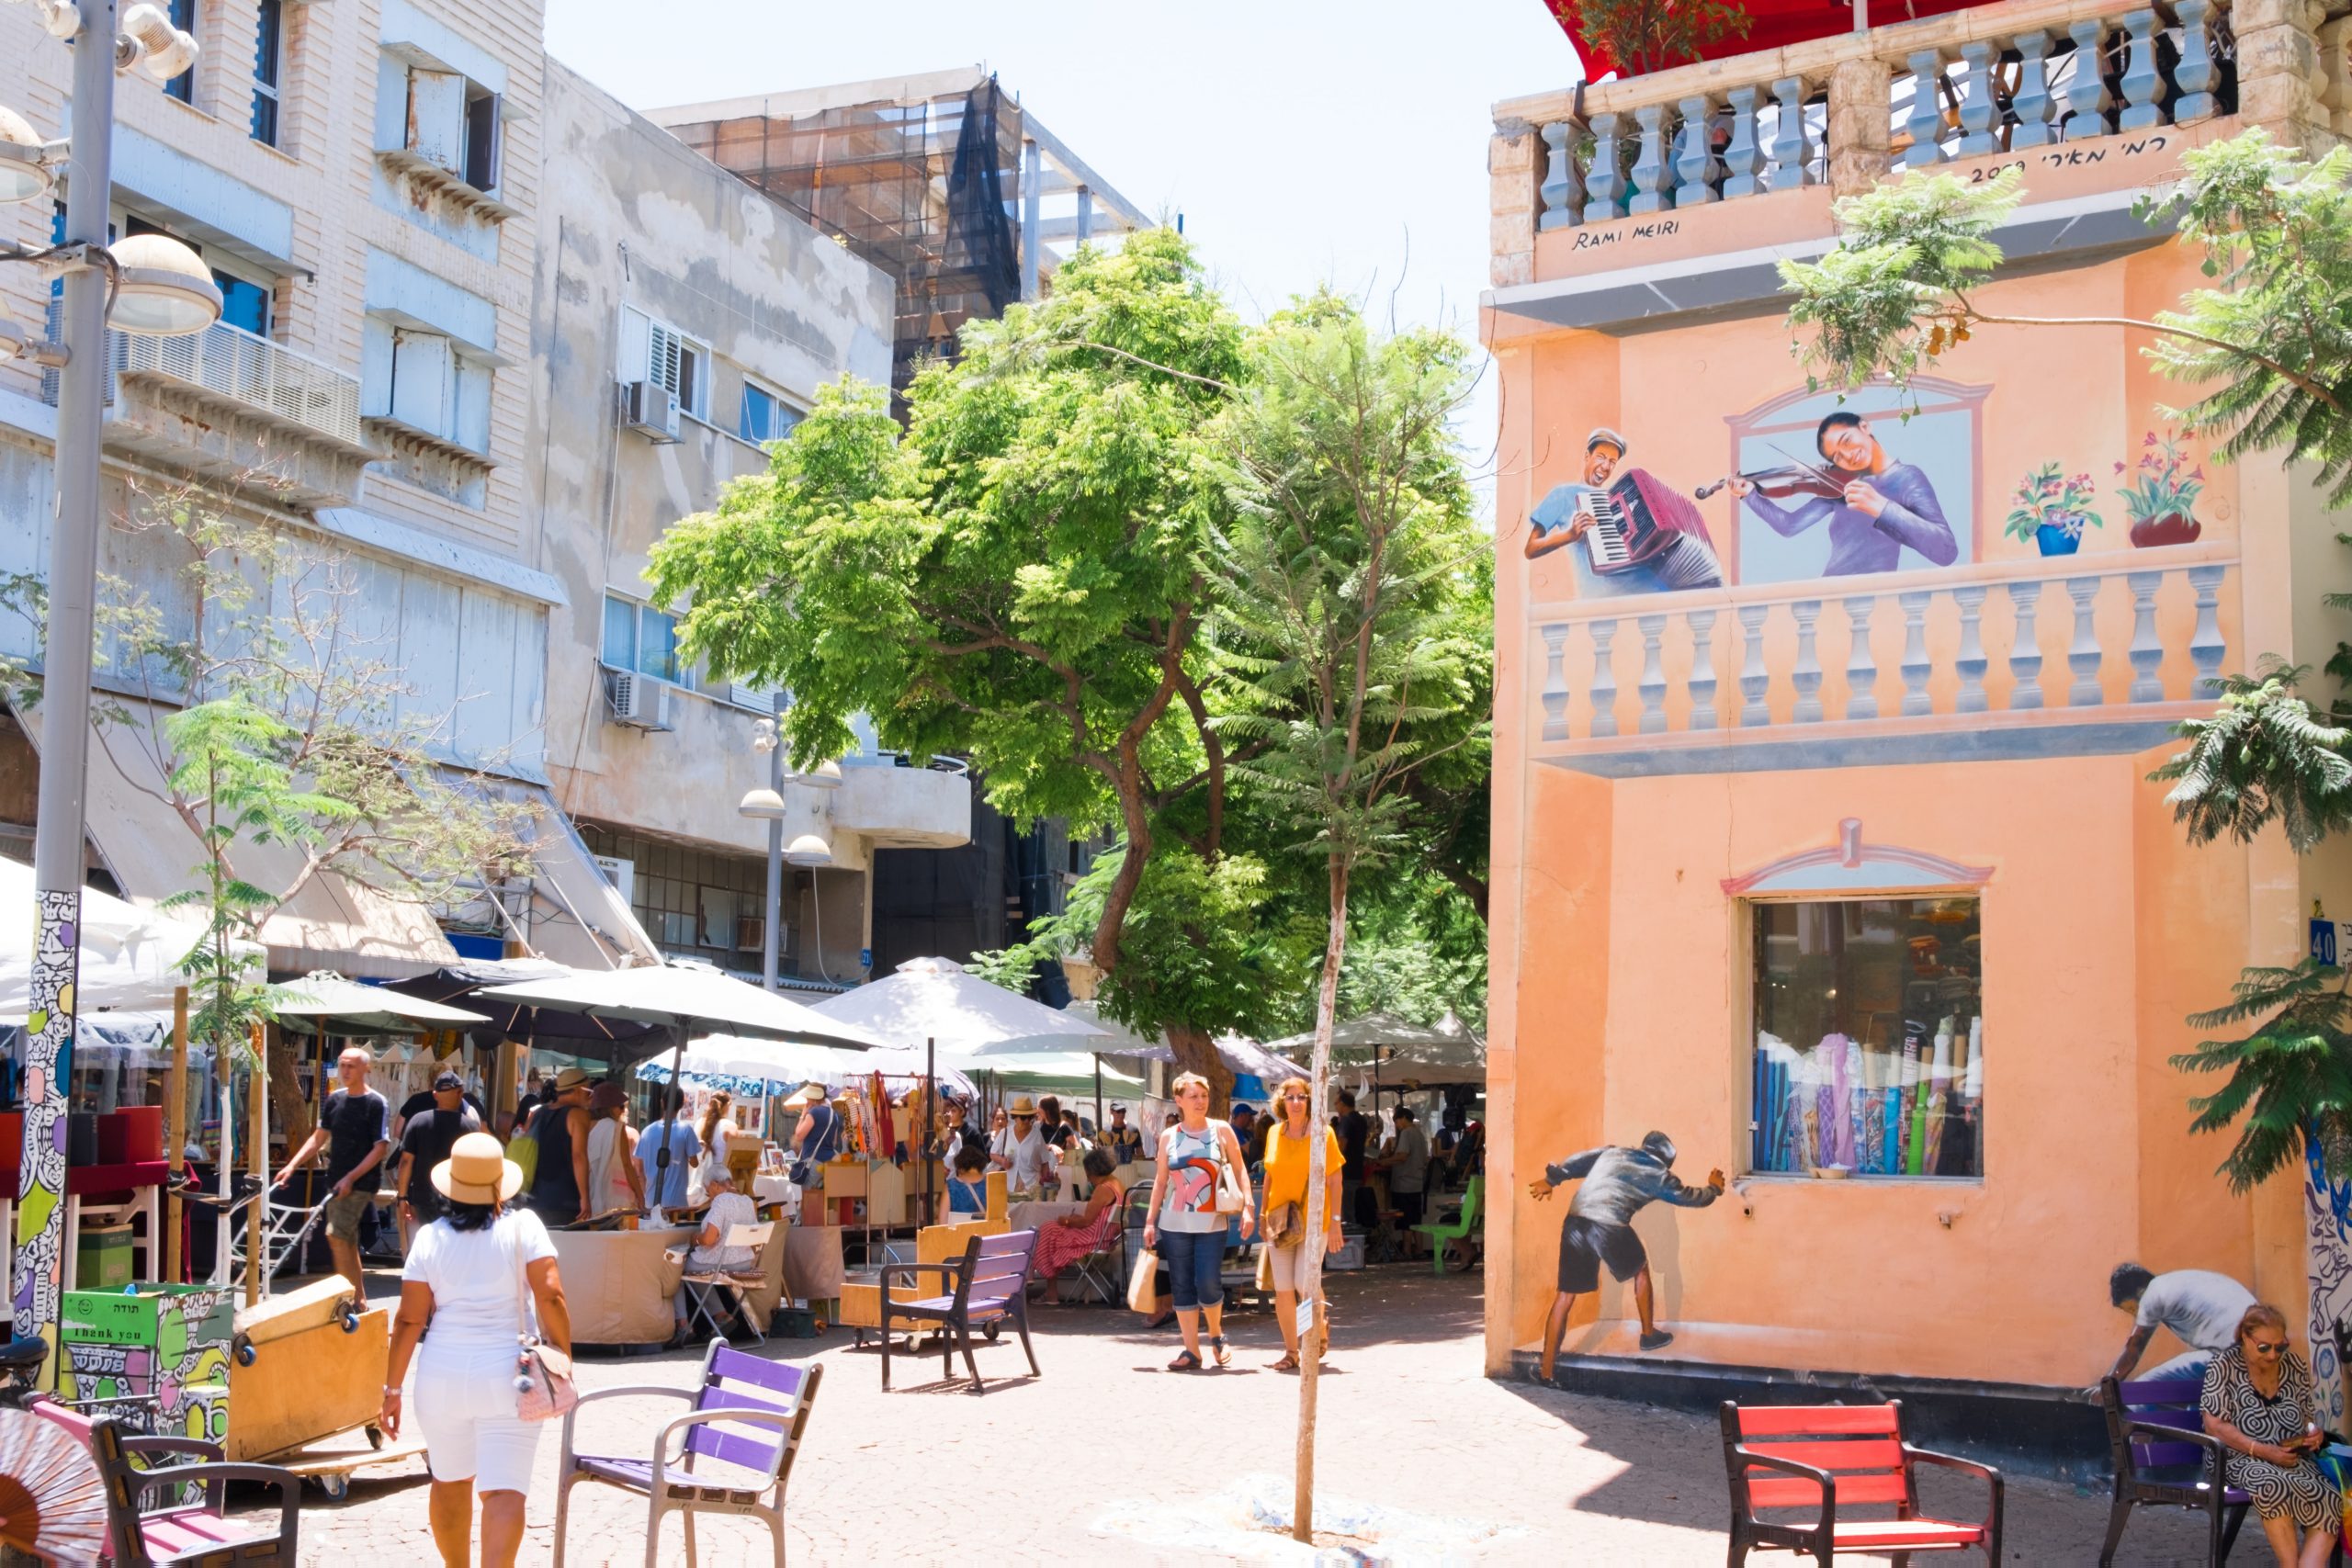 10 Curiosities About Tel Aviv – The Most Frequently Asked Questions